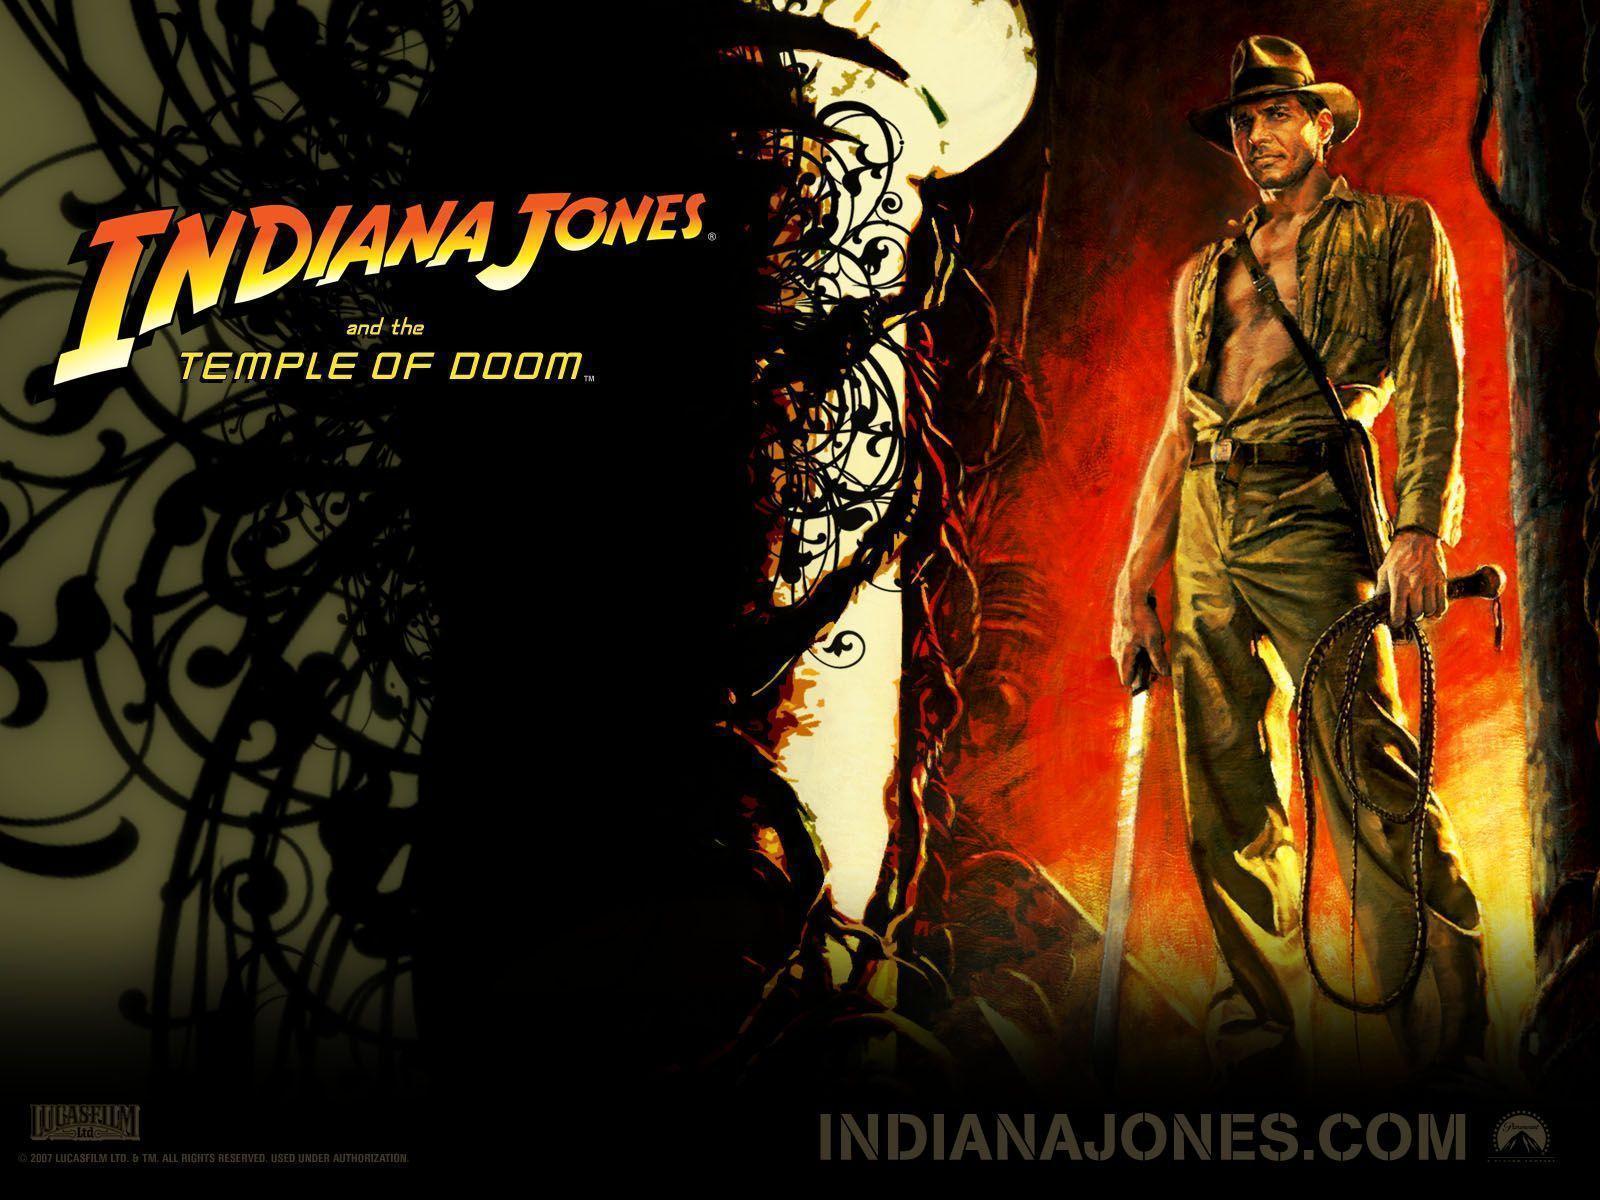 Indiana Jones image The Temple of Doom HD wallpaper and background